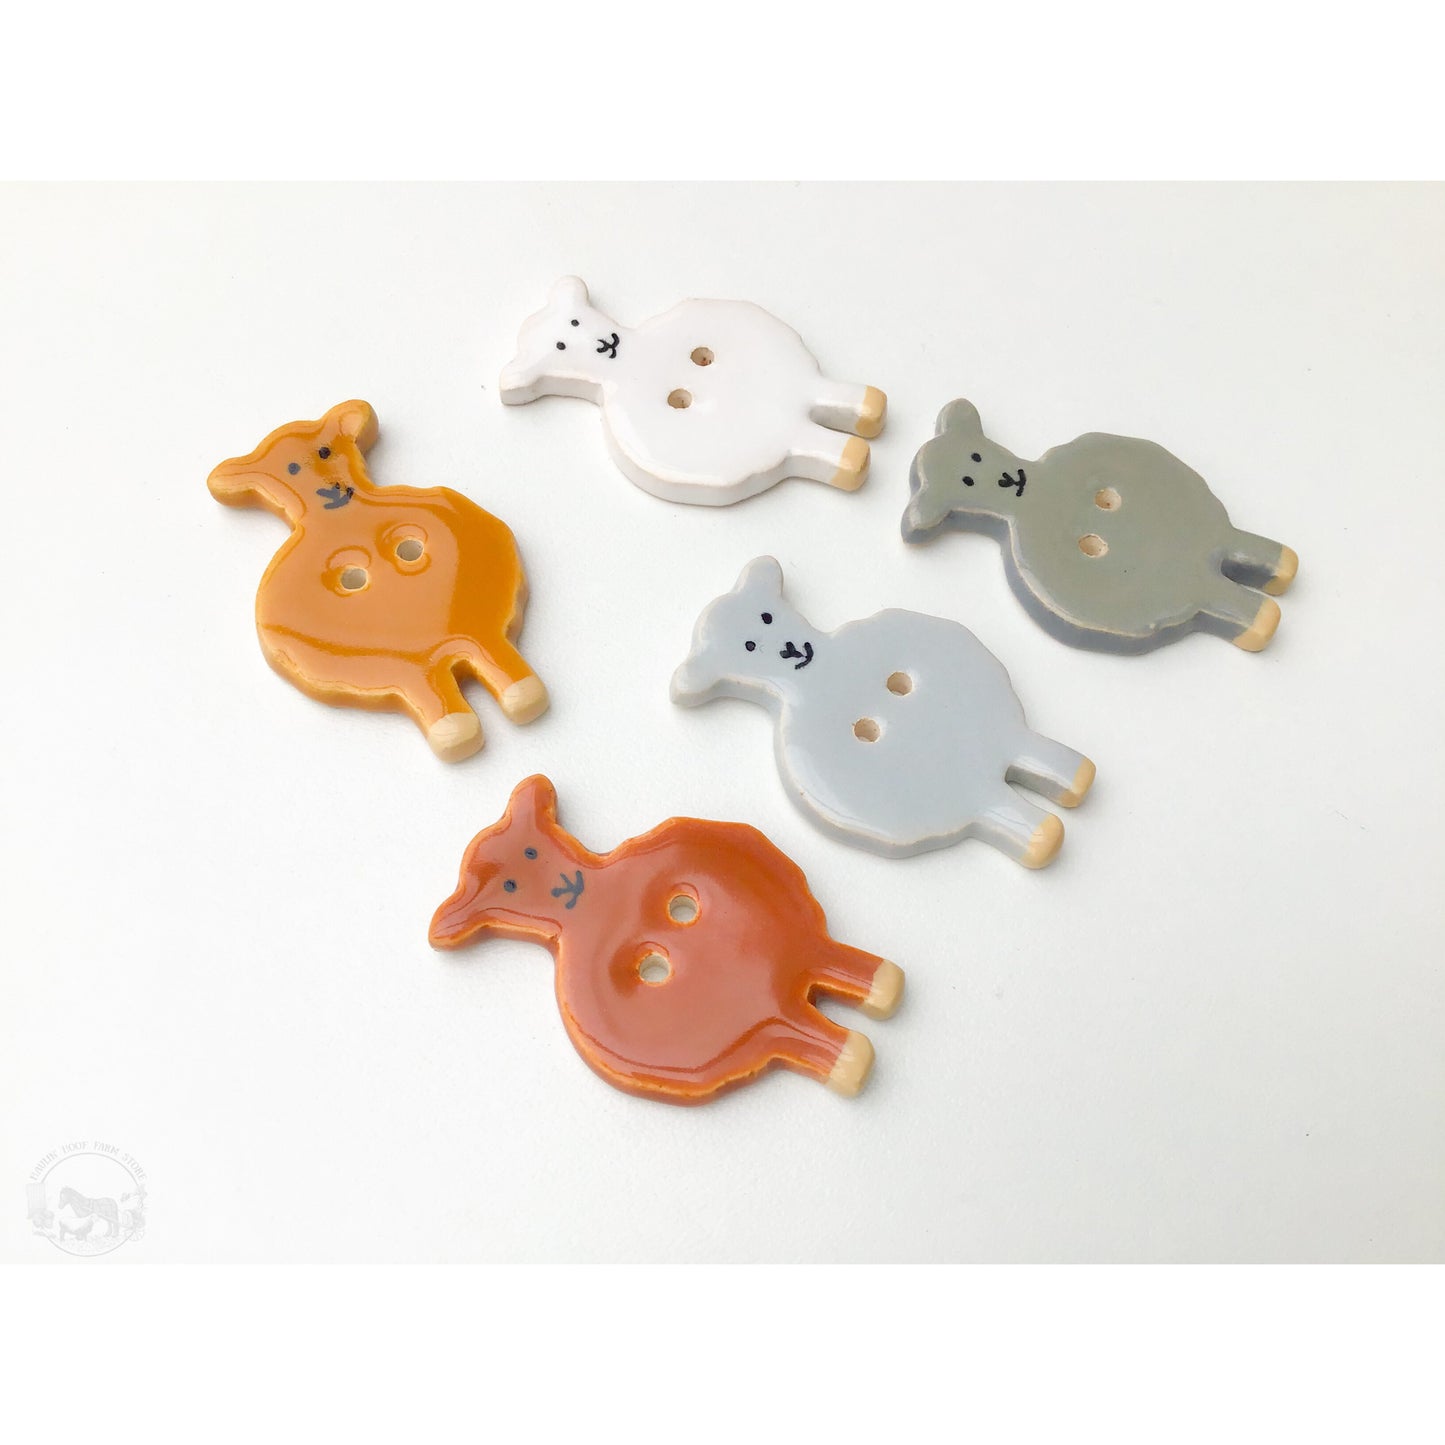 Wooly Friends Button Collection: Artisan Ceramic Sheep Buttons